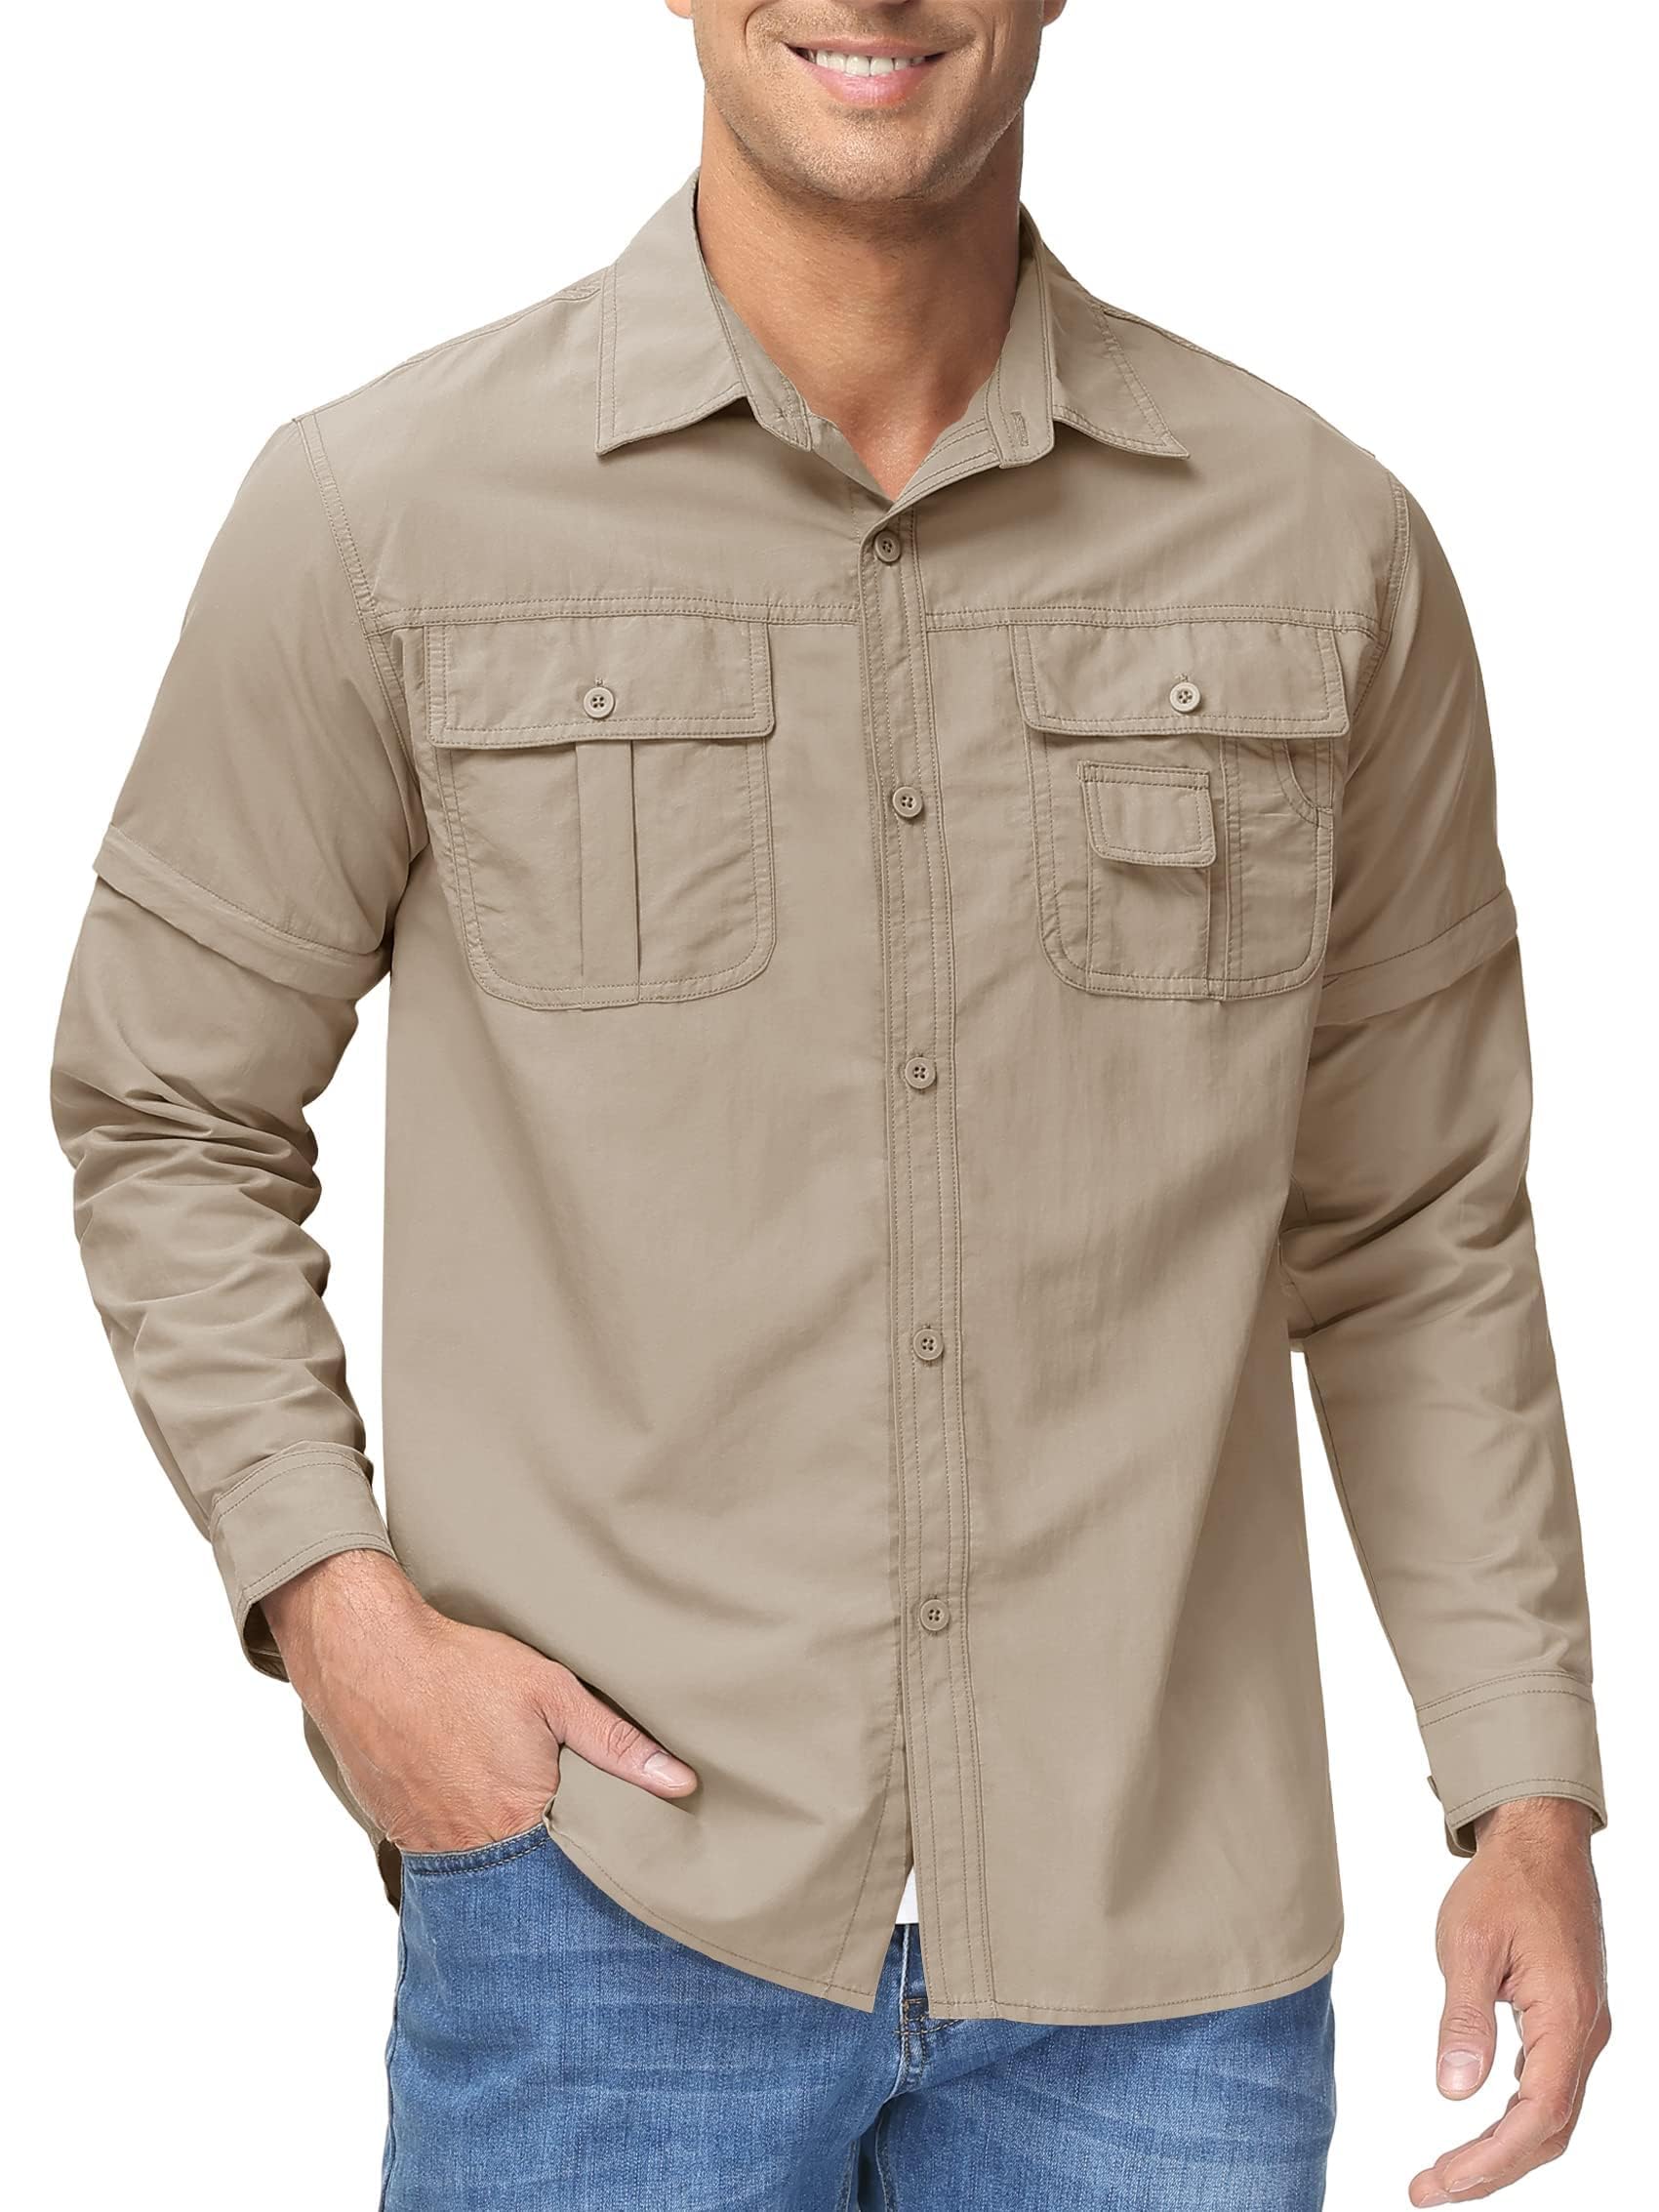 TACVASEN Men's Breathable Quick Dry UV Protection Solid Convertible Long Sleeve Shirt